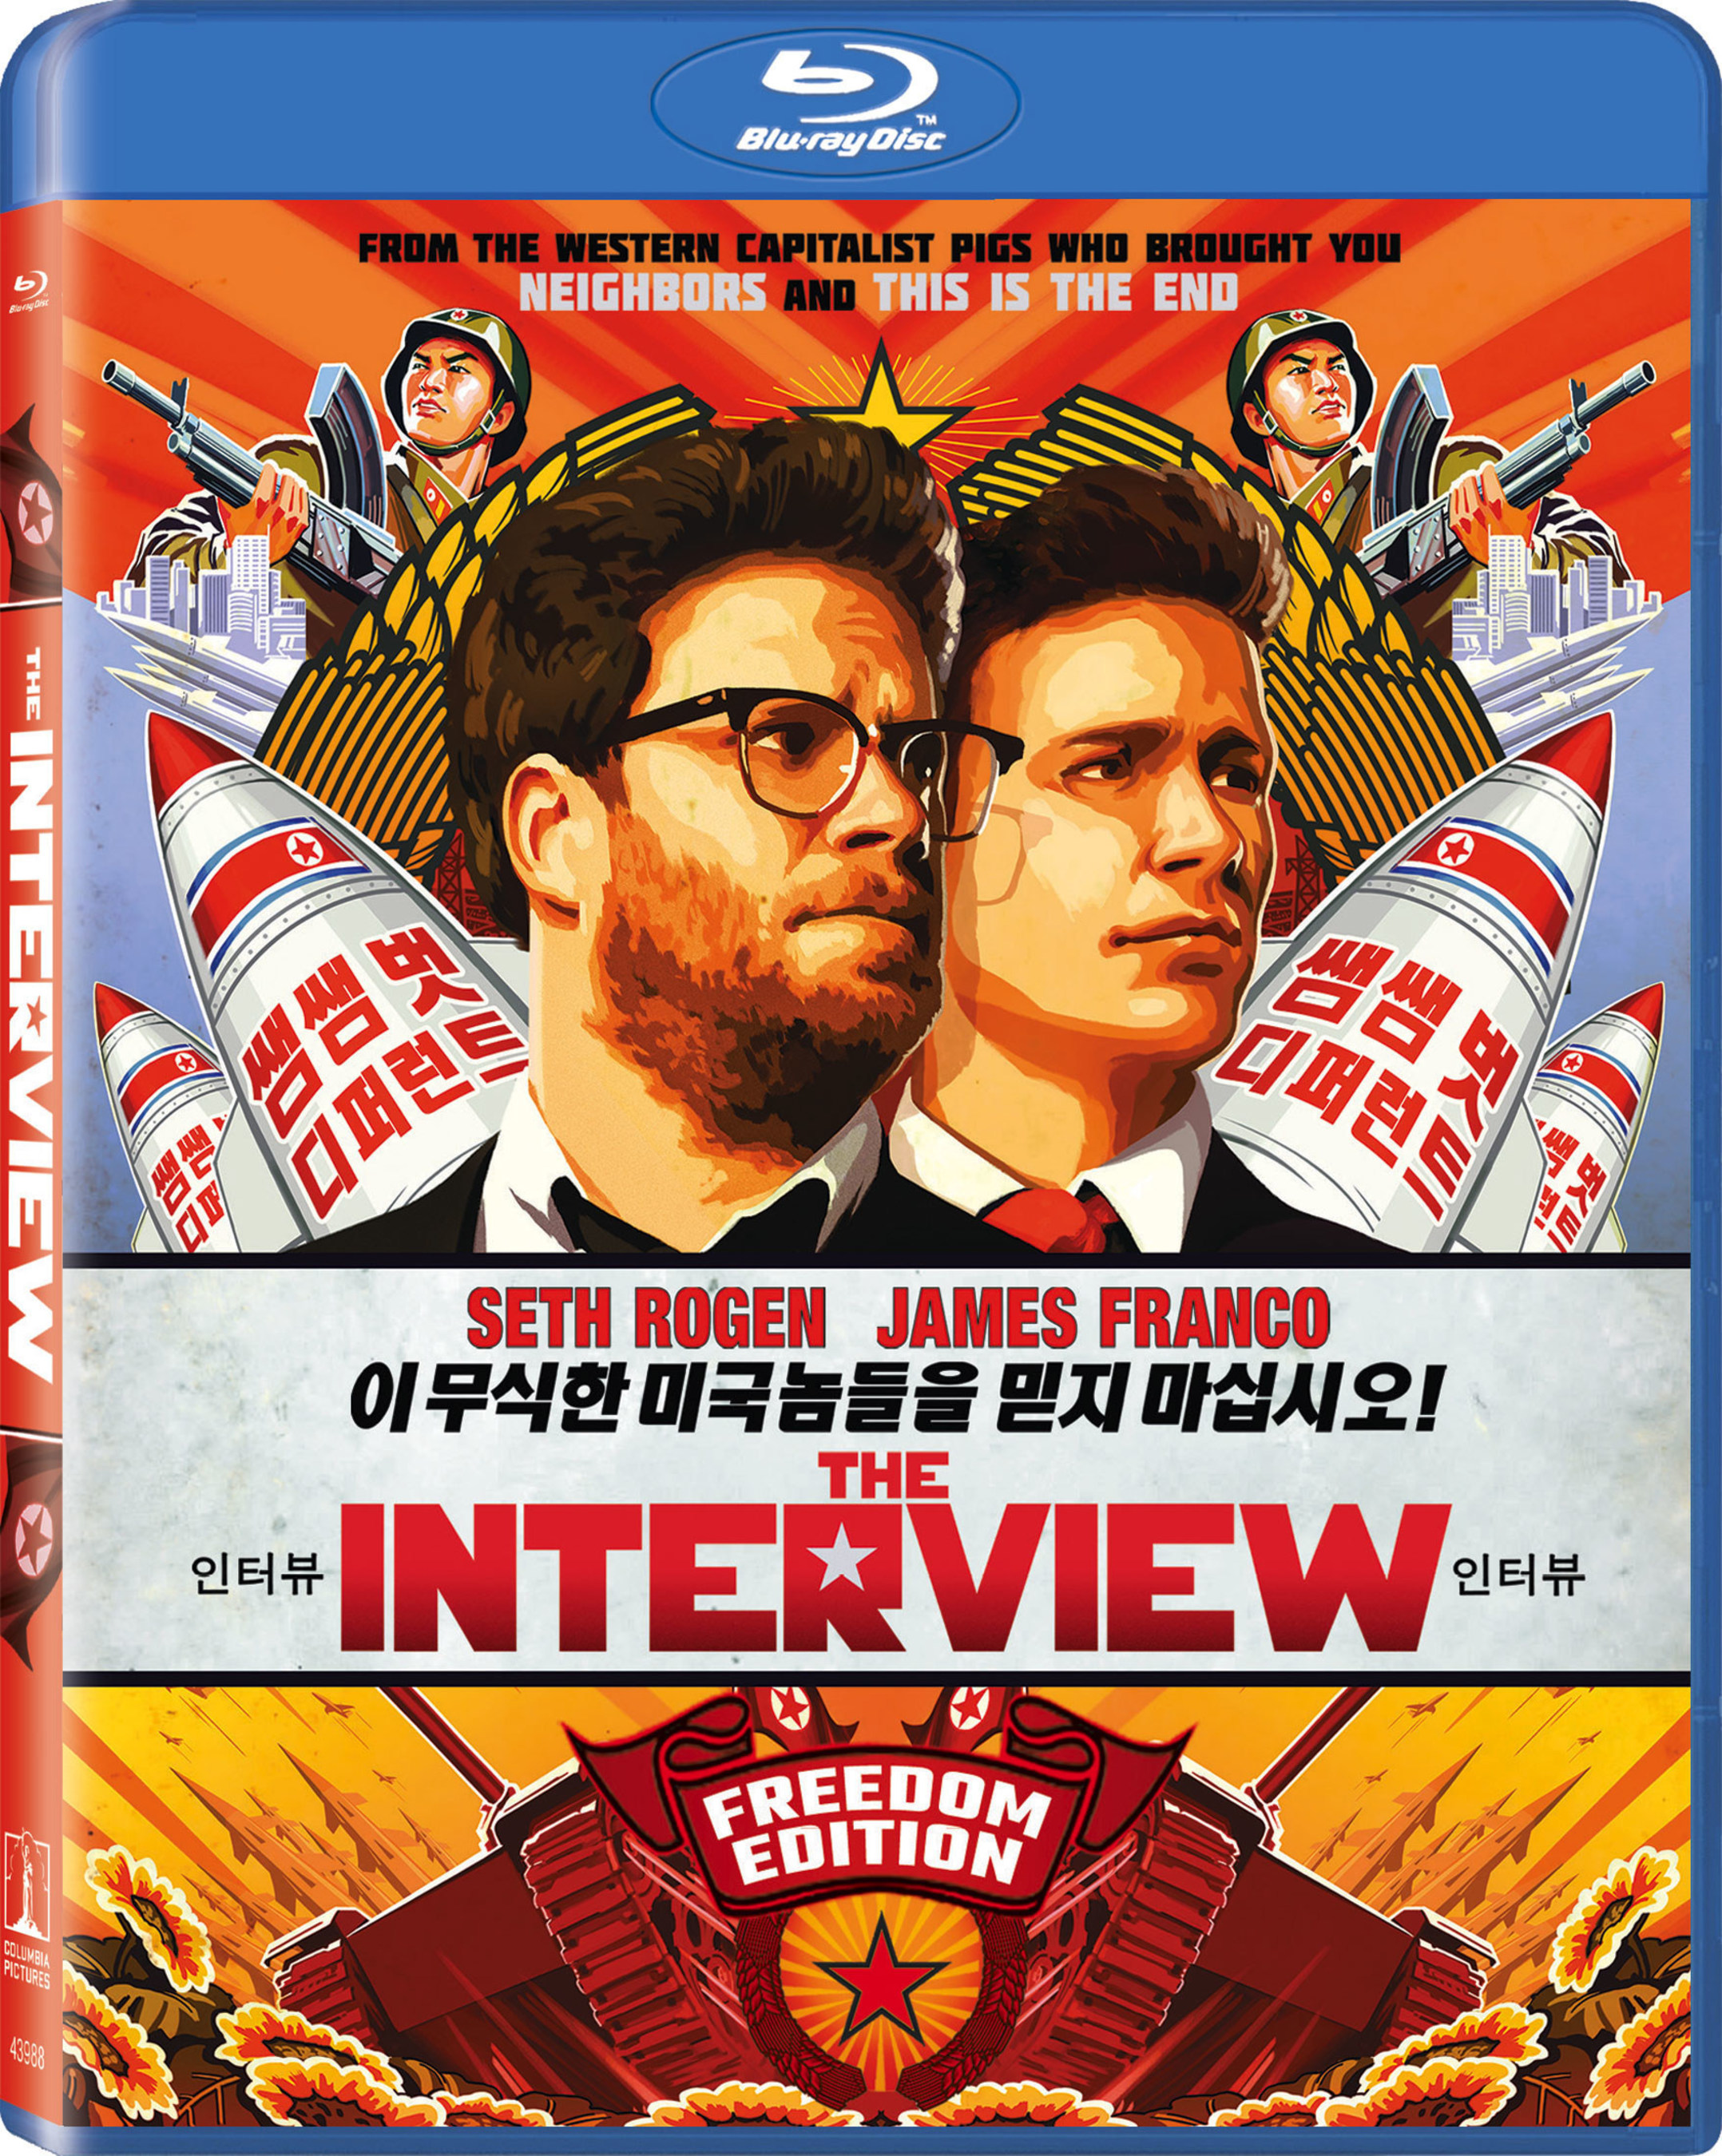 Own The "Freedom Edition" Of "The Interview"On Blu-ray(TM) And DVD Feb. 17